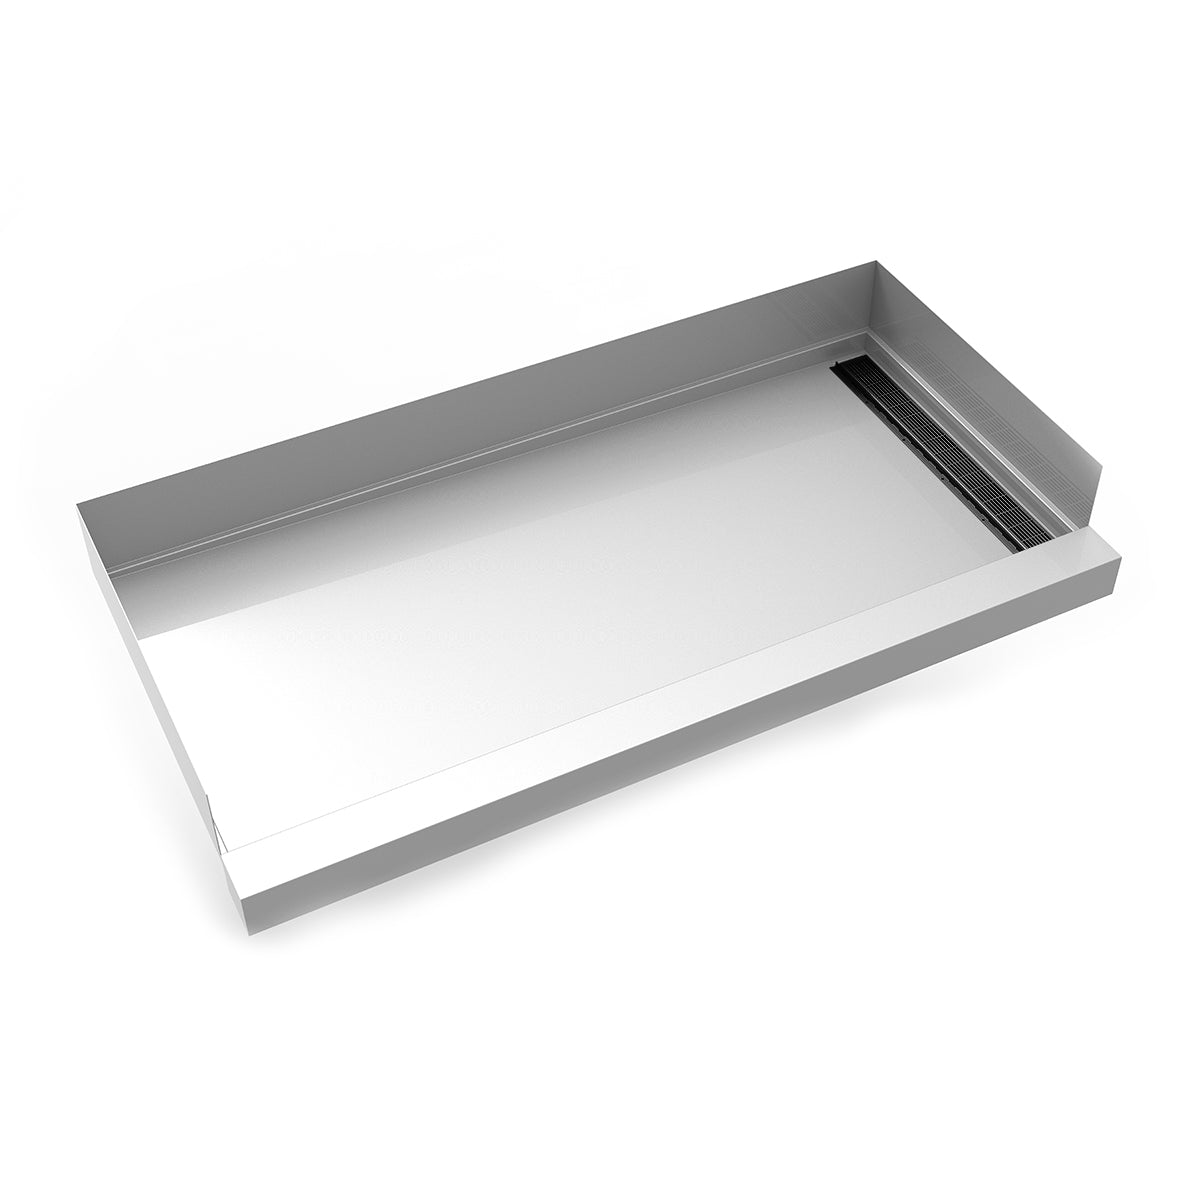 Infinity Drain 30"x 60" Stainless Steel Shower Base with Right Wall Slotted Pattern Linear Drain location